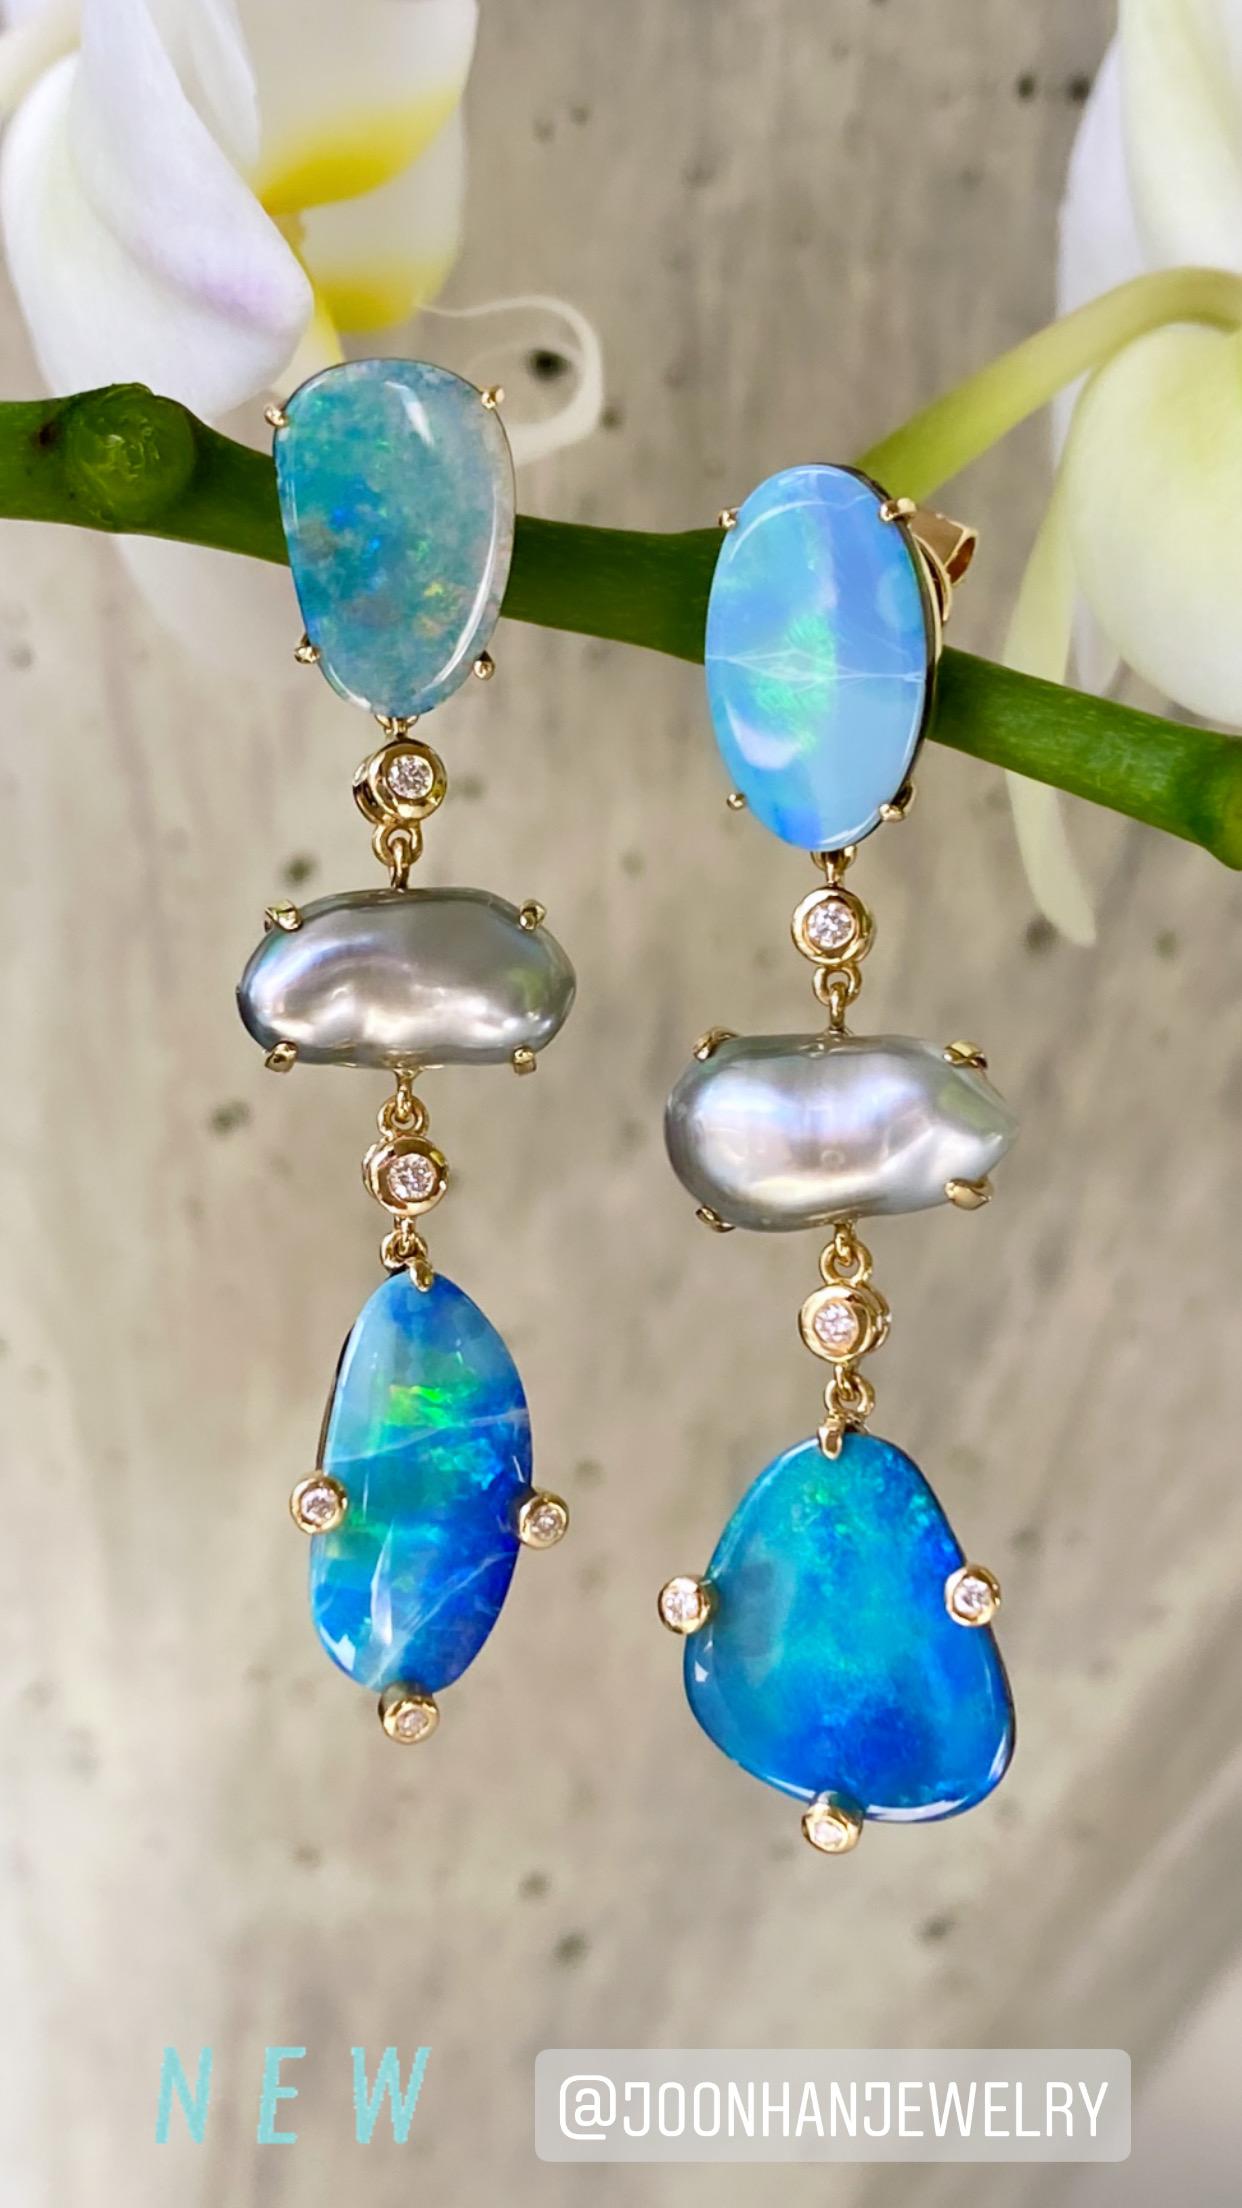 Gorgeous one-of-a-kind drop dangle earrings of boulder opals, light grey keshi pearls and diamonds, handcrafted in 18 karat yellow gold.

These delightful one-of-a-kind earrings of luscious boulder opals and keshi pearls make a beautiful, vibrant